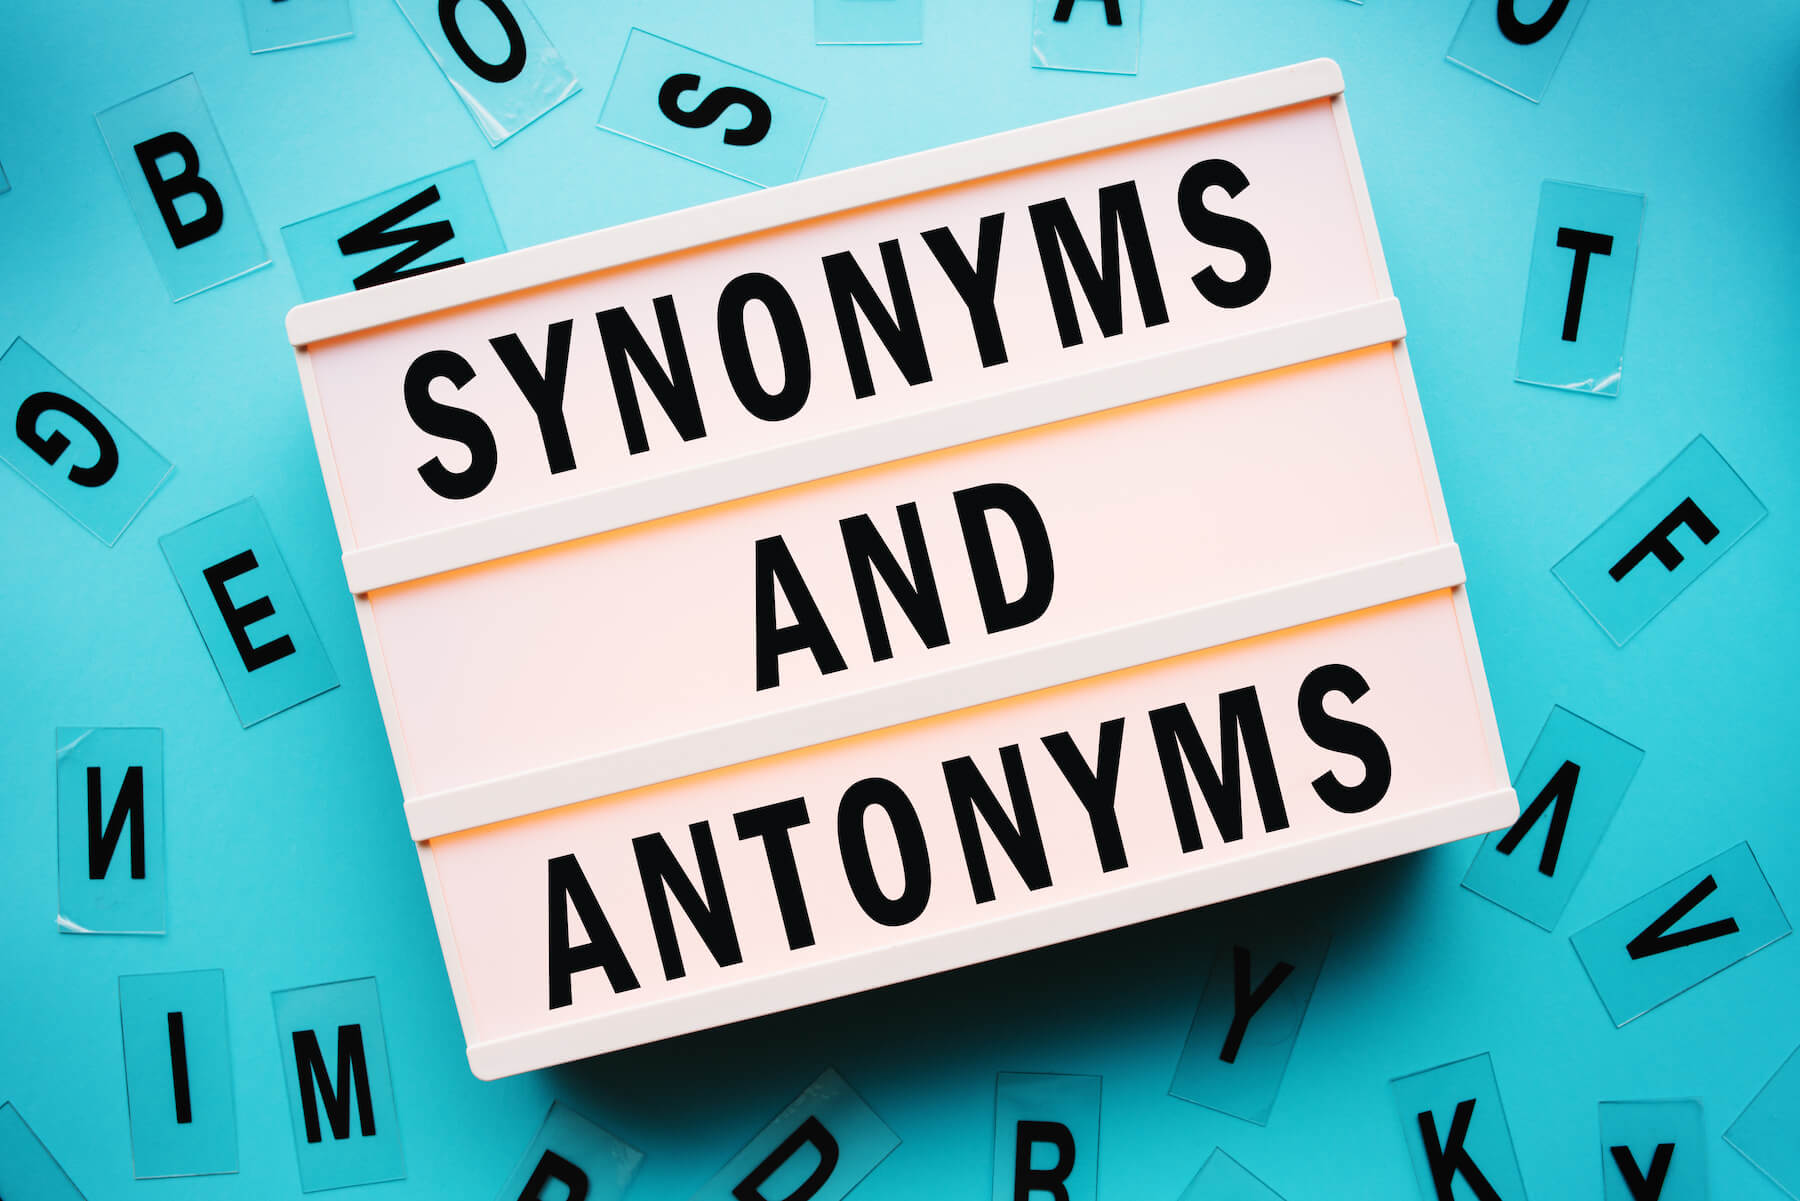 Synonyms and Antonyms - Class 11 - Quizizz